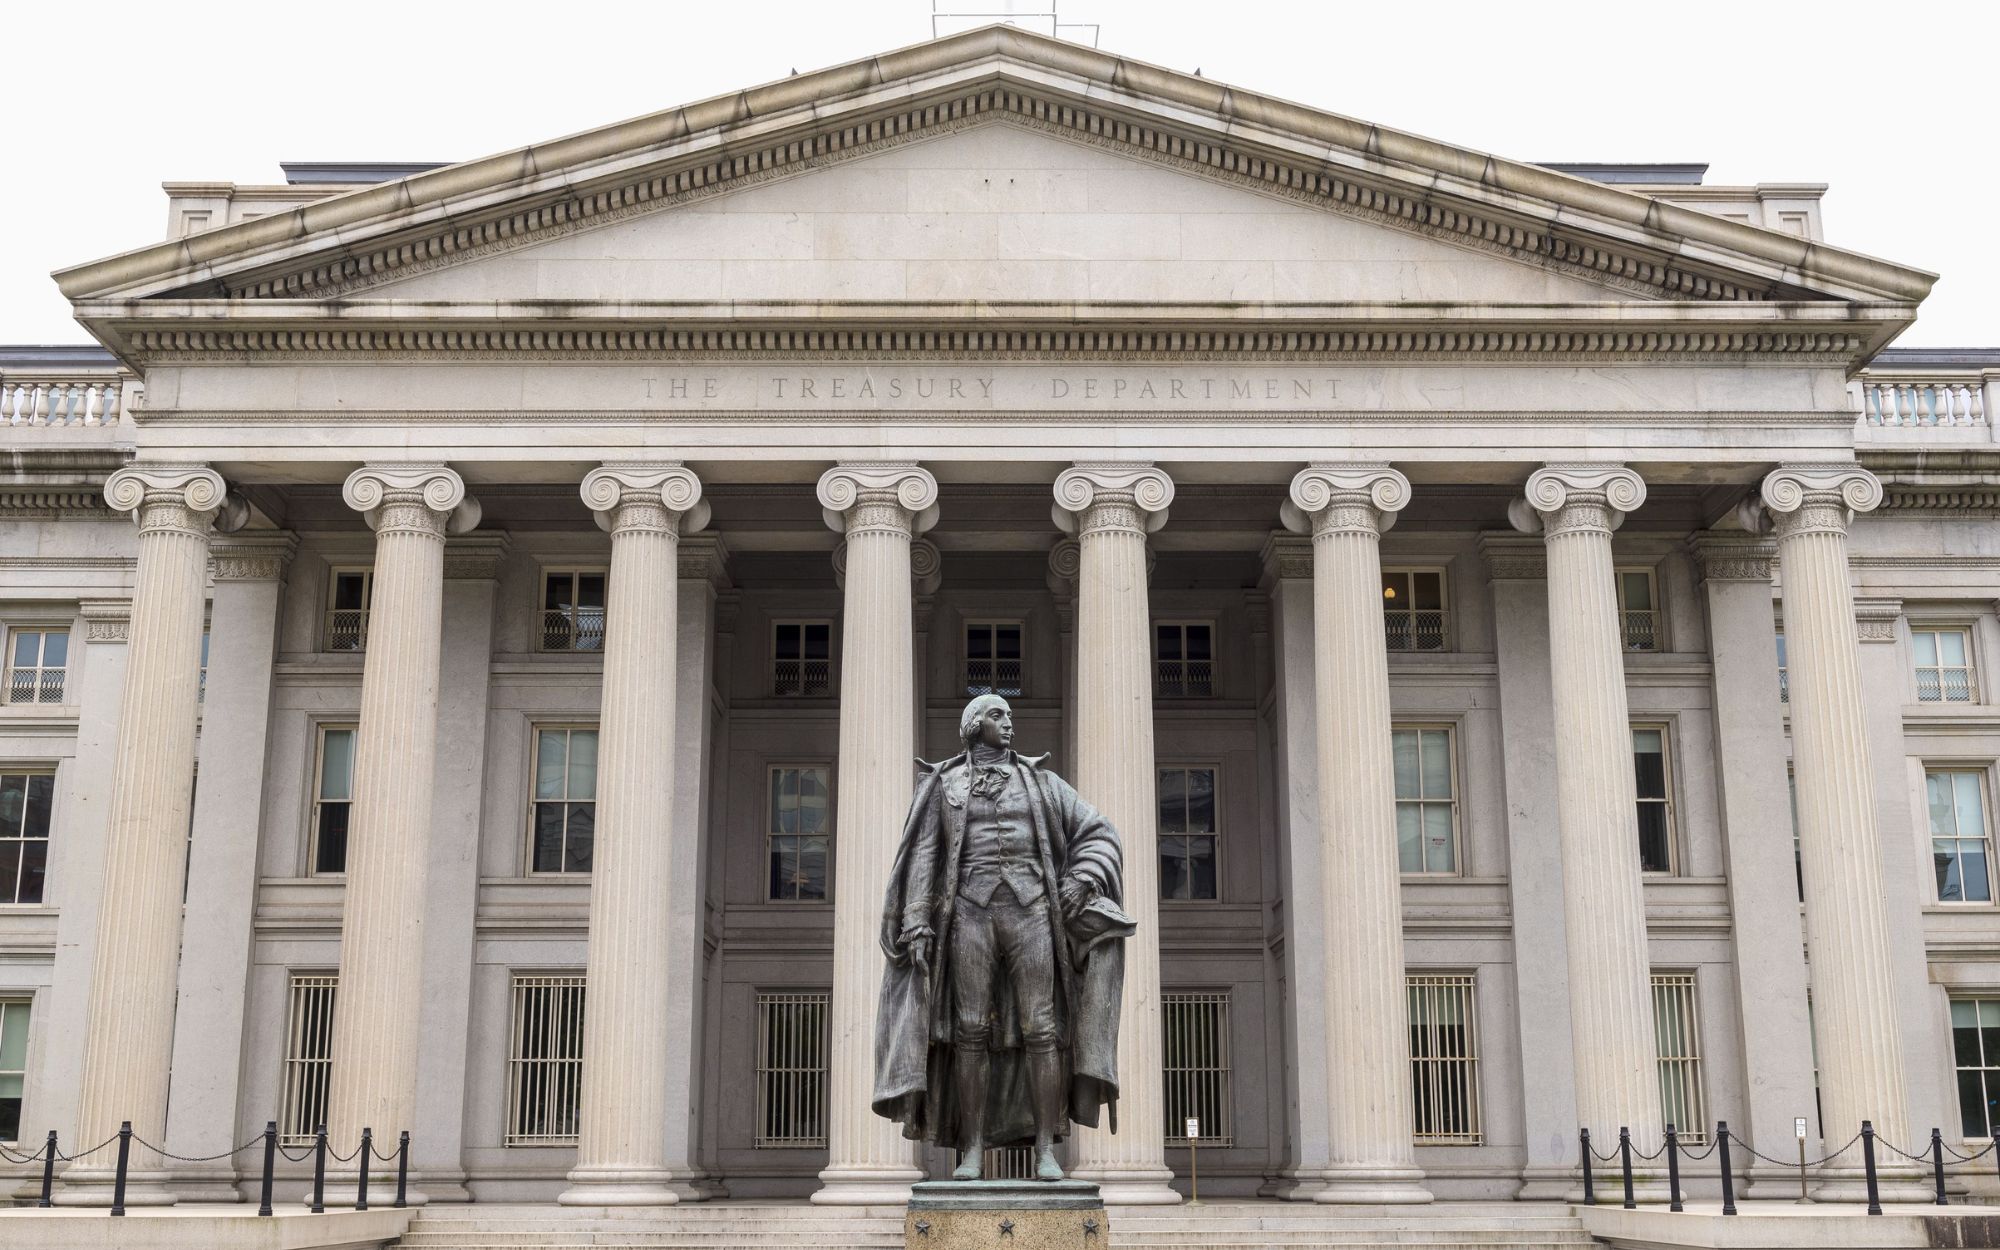 The Treasury Department building, with a statue of Albert Gallatin, the 4th Secretary of the Treasury, in front of it